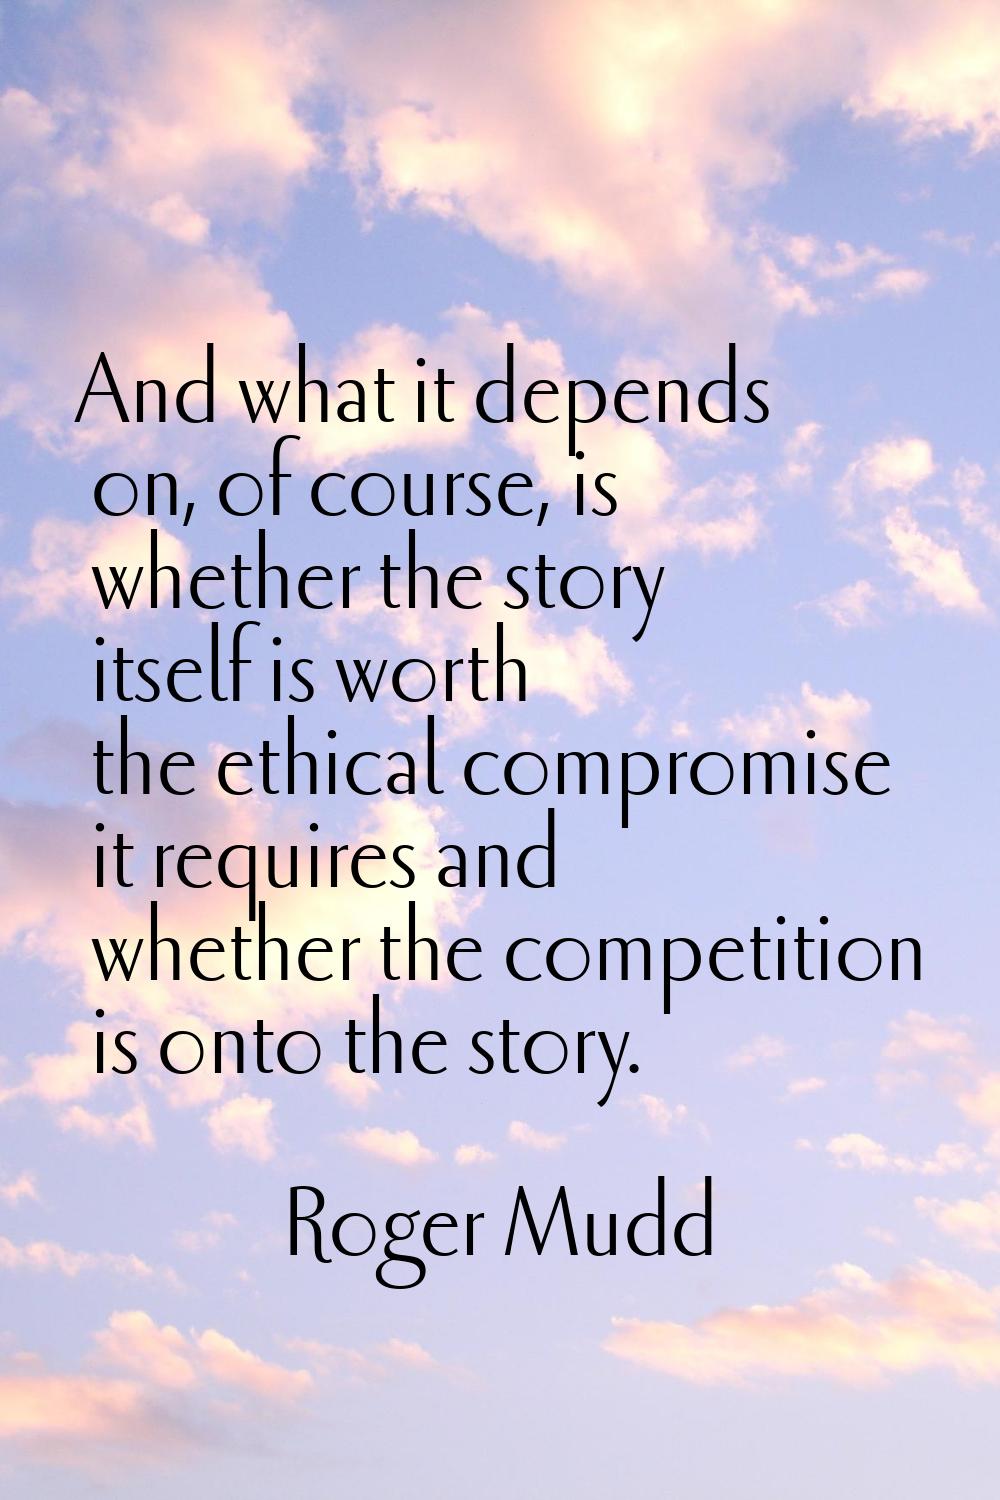 And what it depends on, of course, is whether the story itself is worth the ethical compromise it r